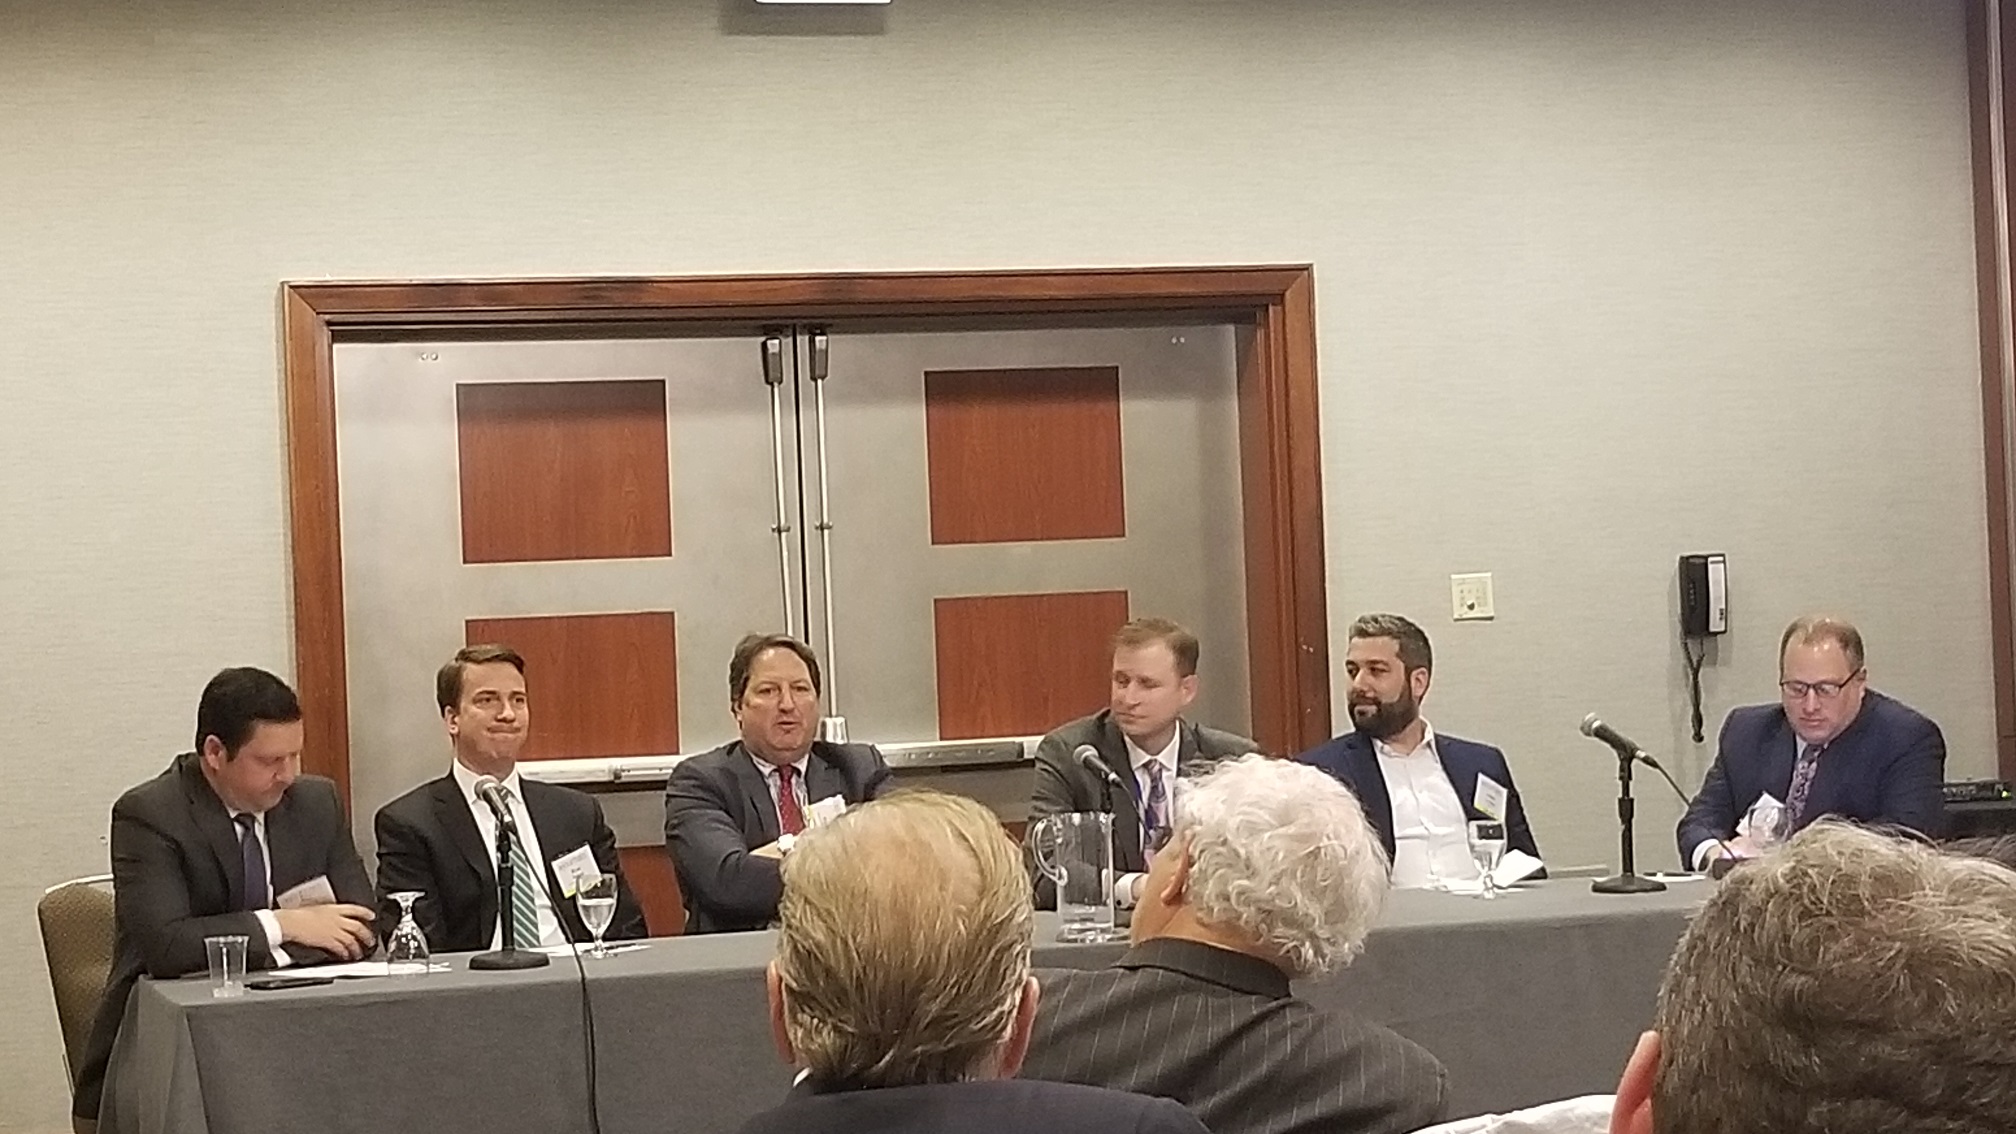 Art Rendak spoke on the finance breakout panel during the 2019 17th Annual Commercial Real Estate Forecast Conference.